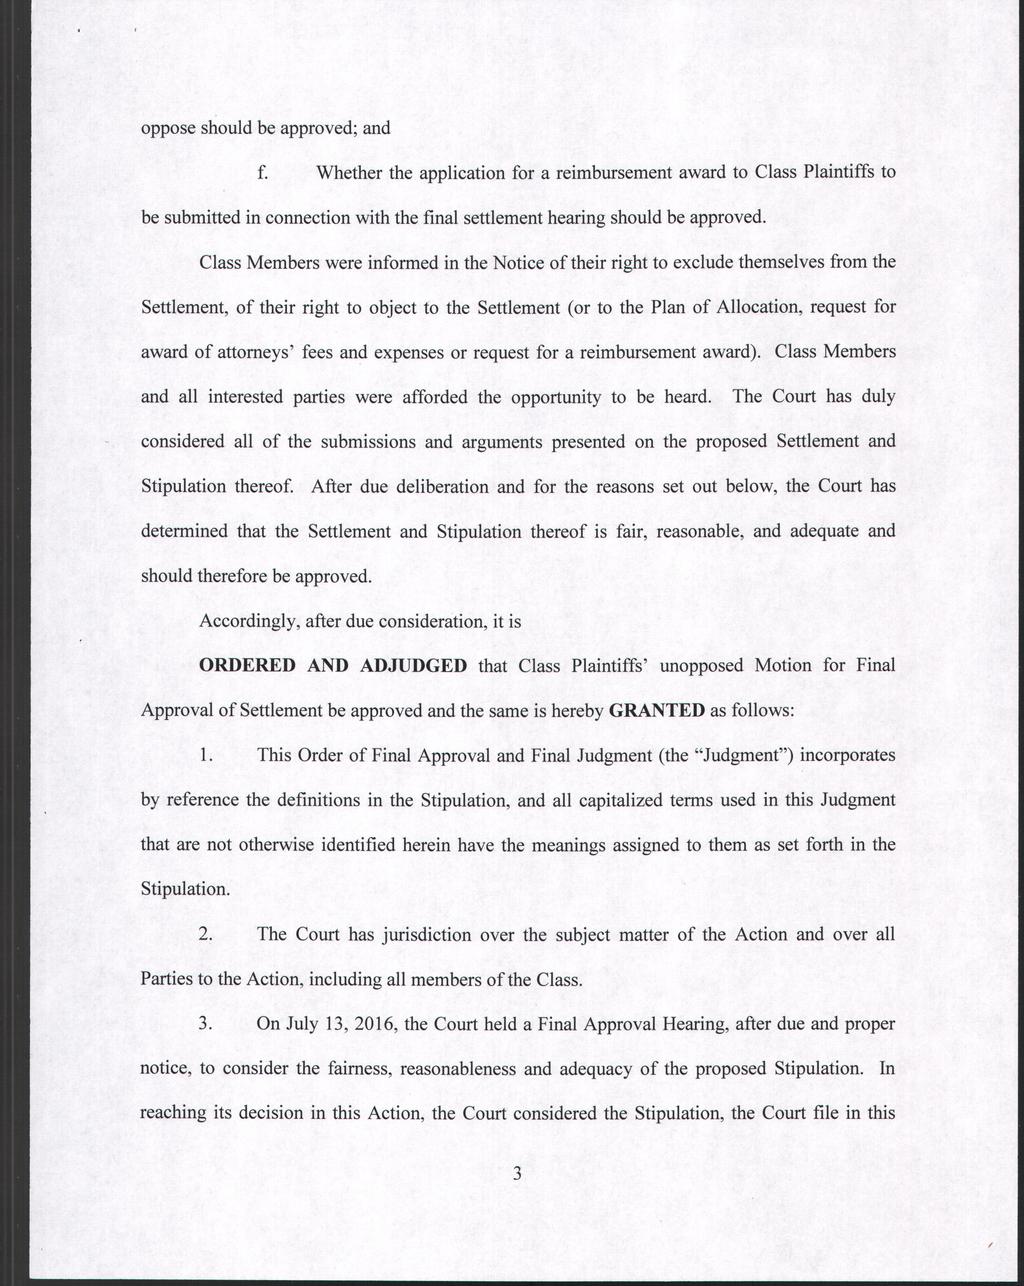 Case: 1:12-cv-02450 Document #: 368 Filed: 07/13/16 Page 3 of 11 PageID #:7445 oppose should be approved; and f.